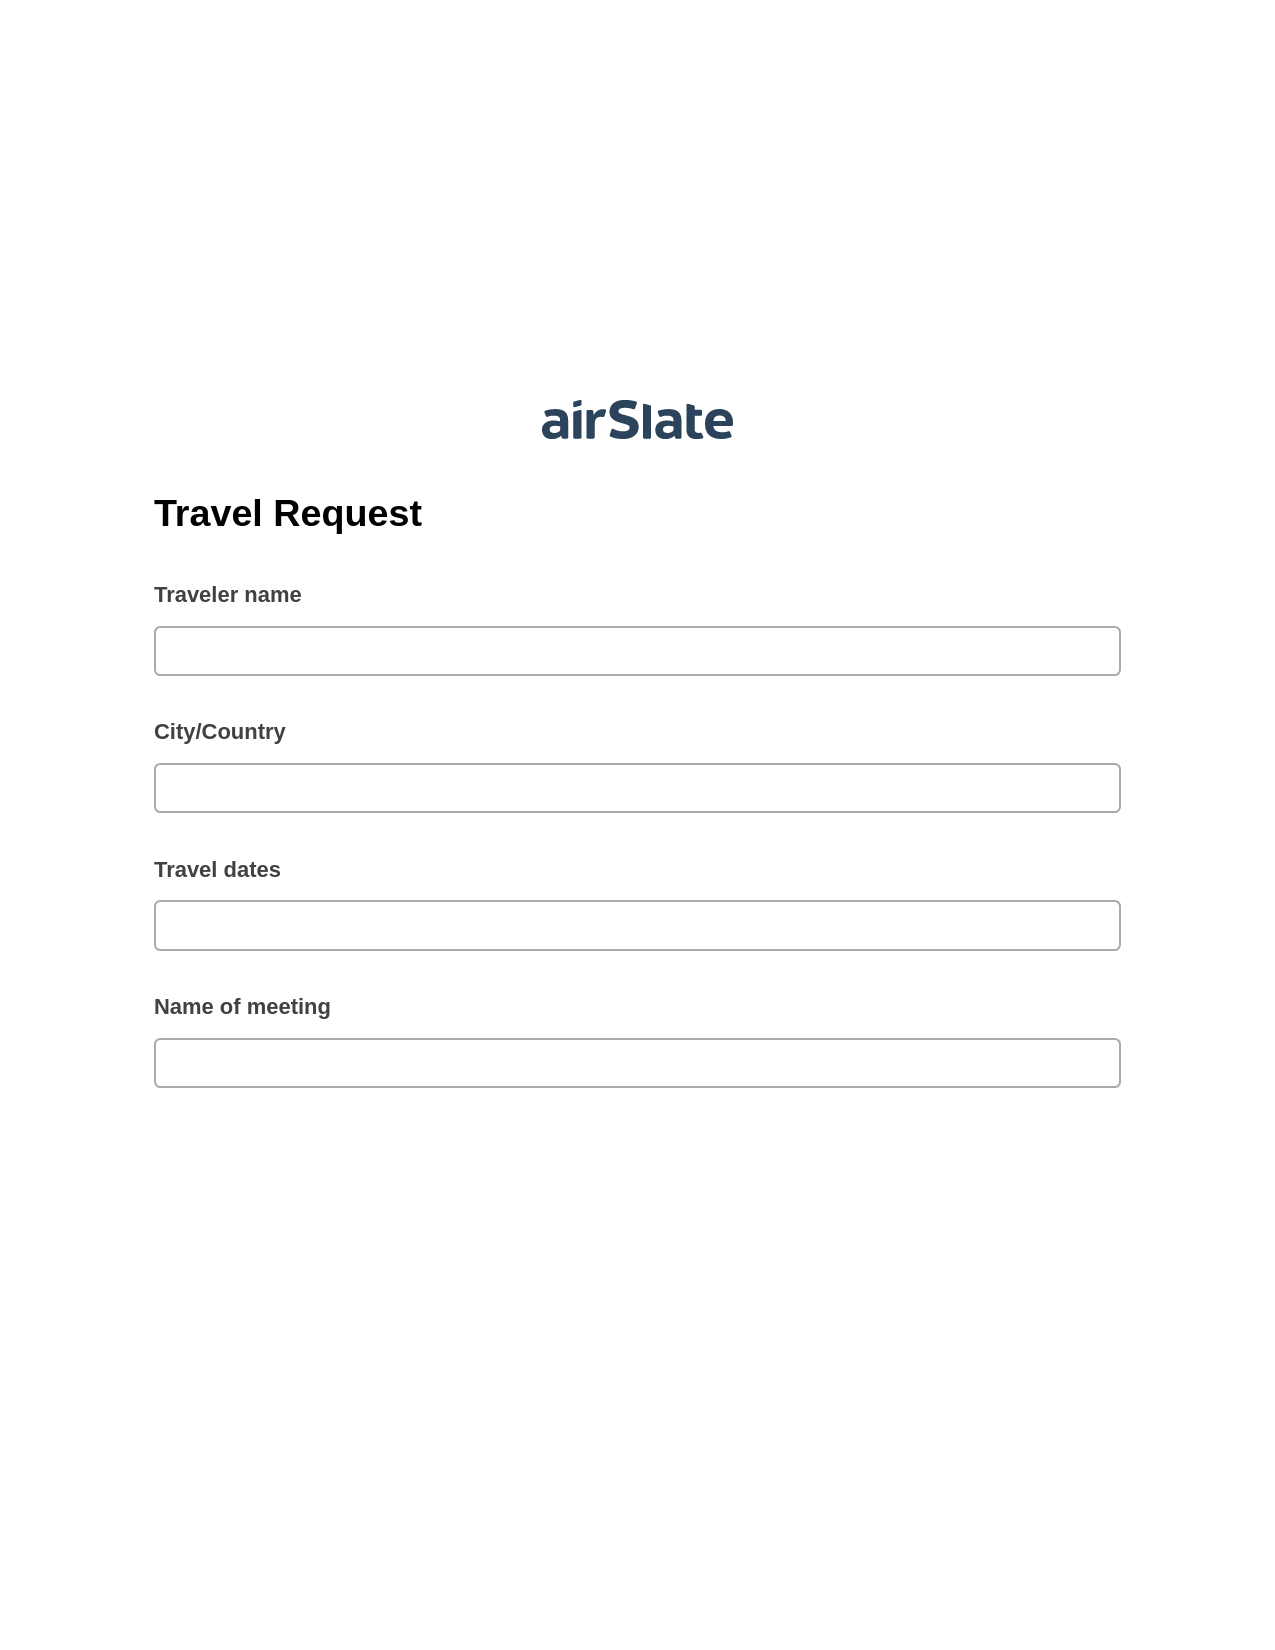 Travel Request Pre-fill from CSV File Bot, Create slate addon, Export to MySQL Bot